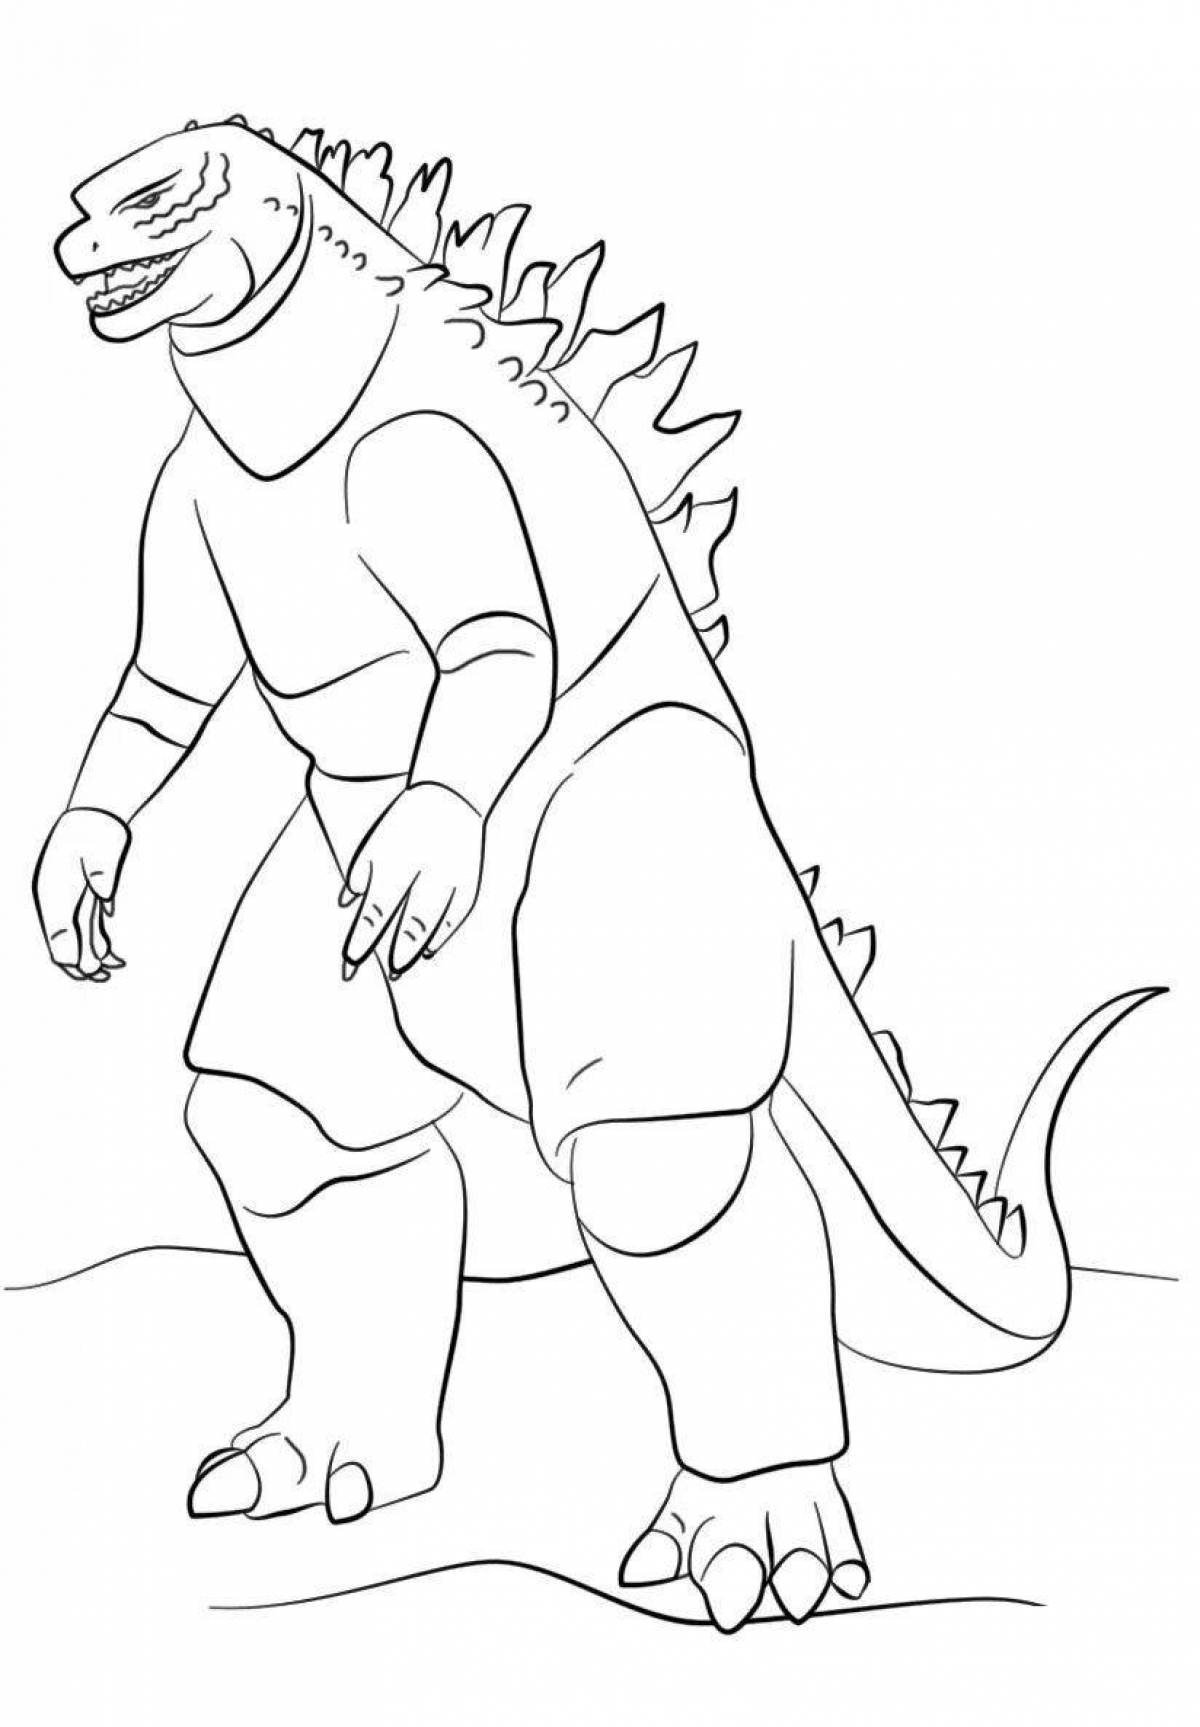 Majestic Godzilla Coloring Page for Boys